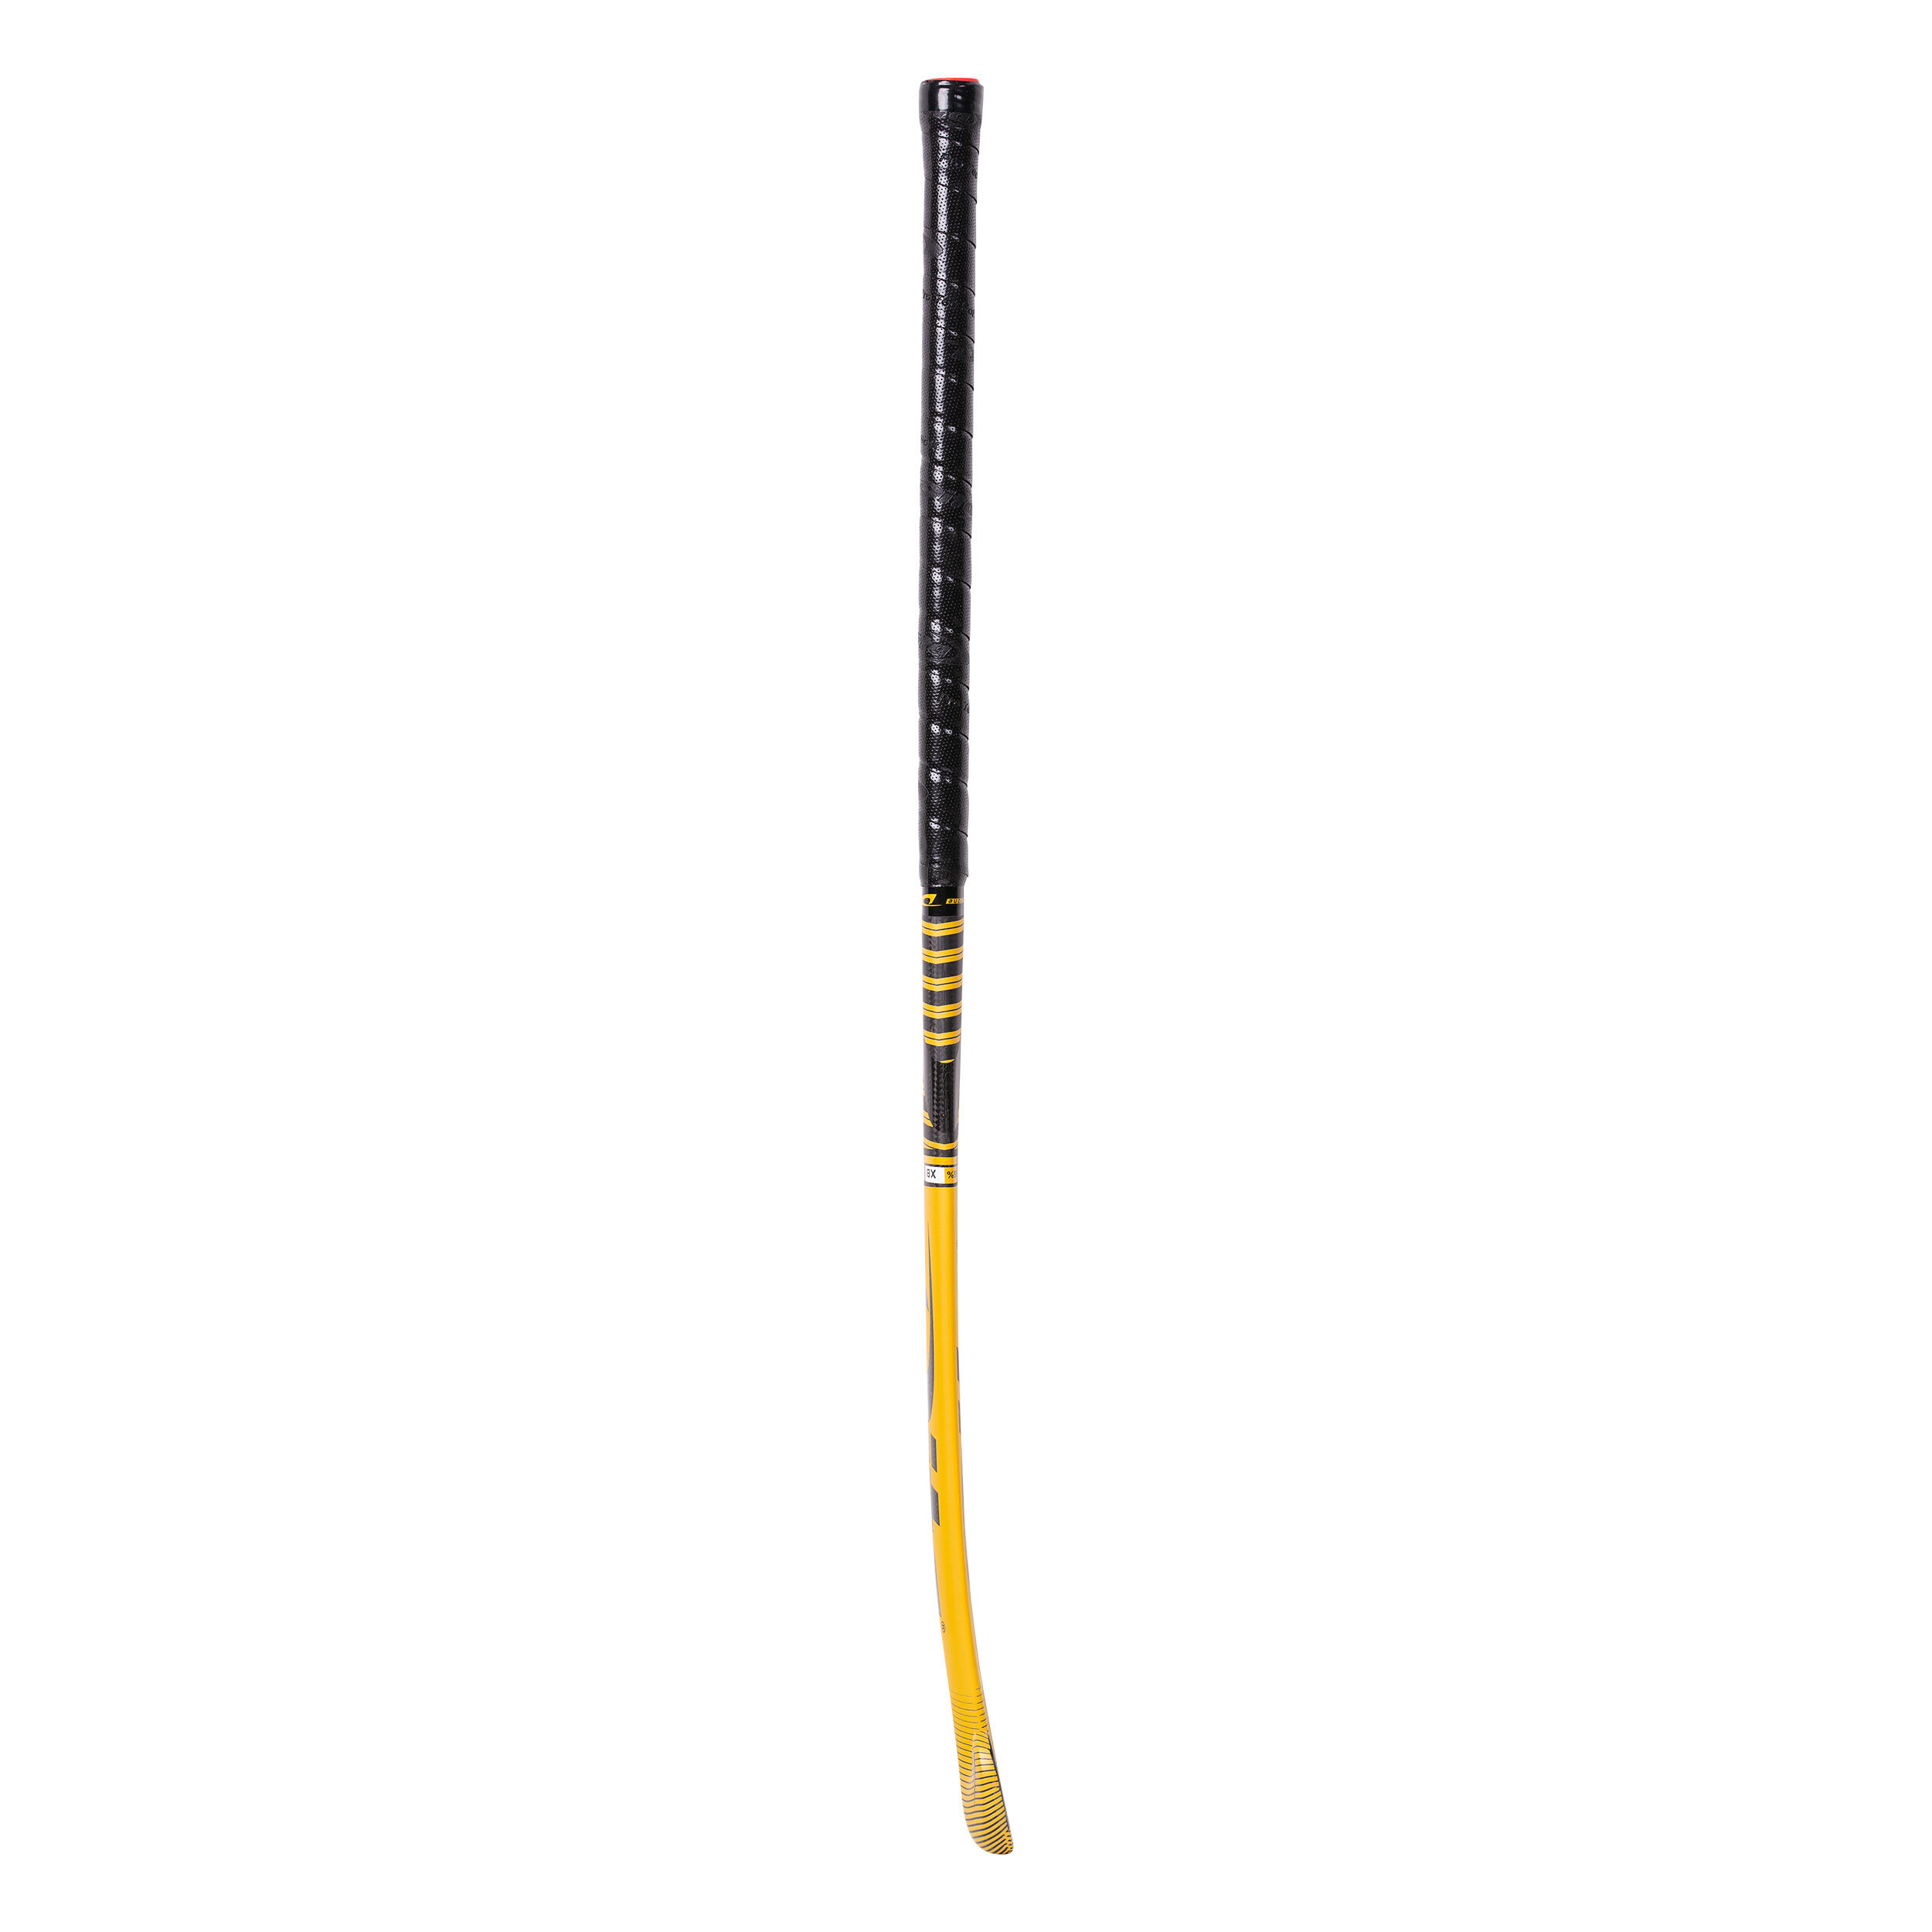 Adult Advanced 85% Carbon X Low Bow Field Hockey Stick carbotecC85 - Gold/Black 2/13